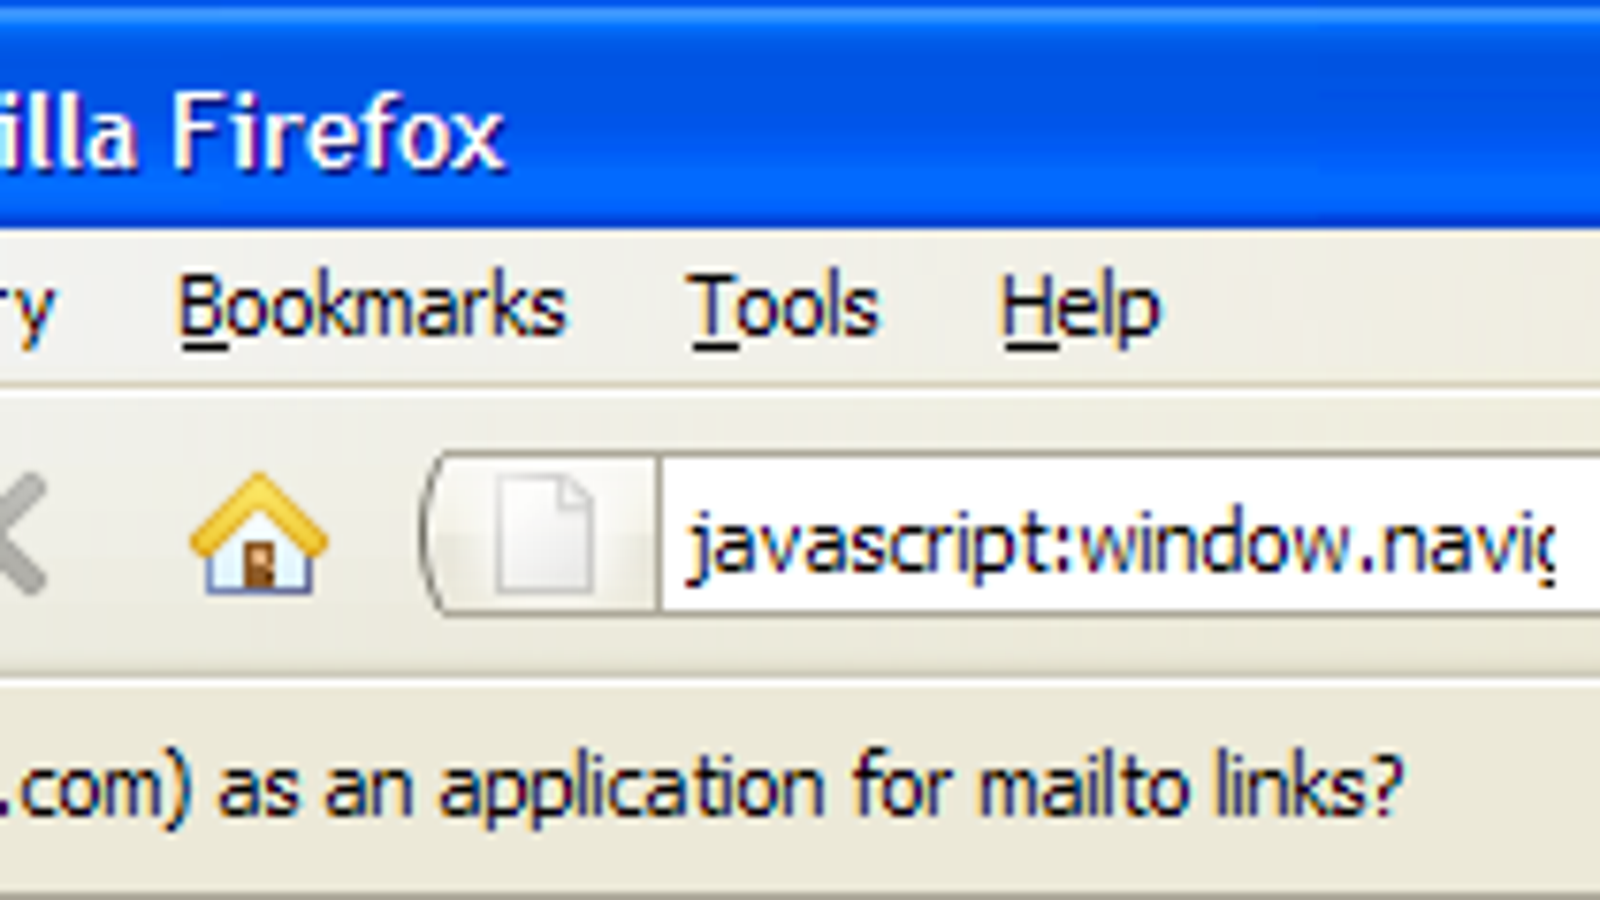 mailtrack for gmail firefox